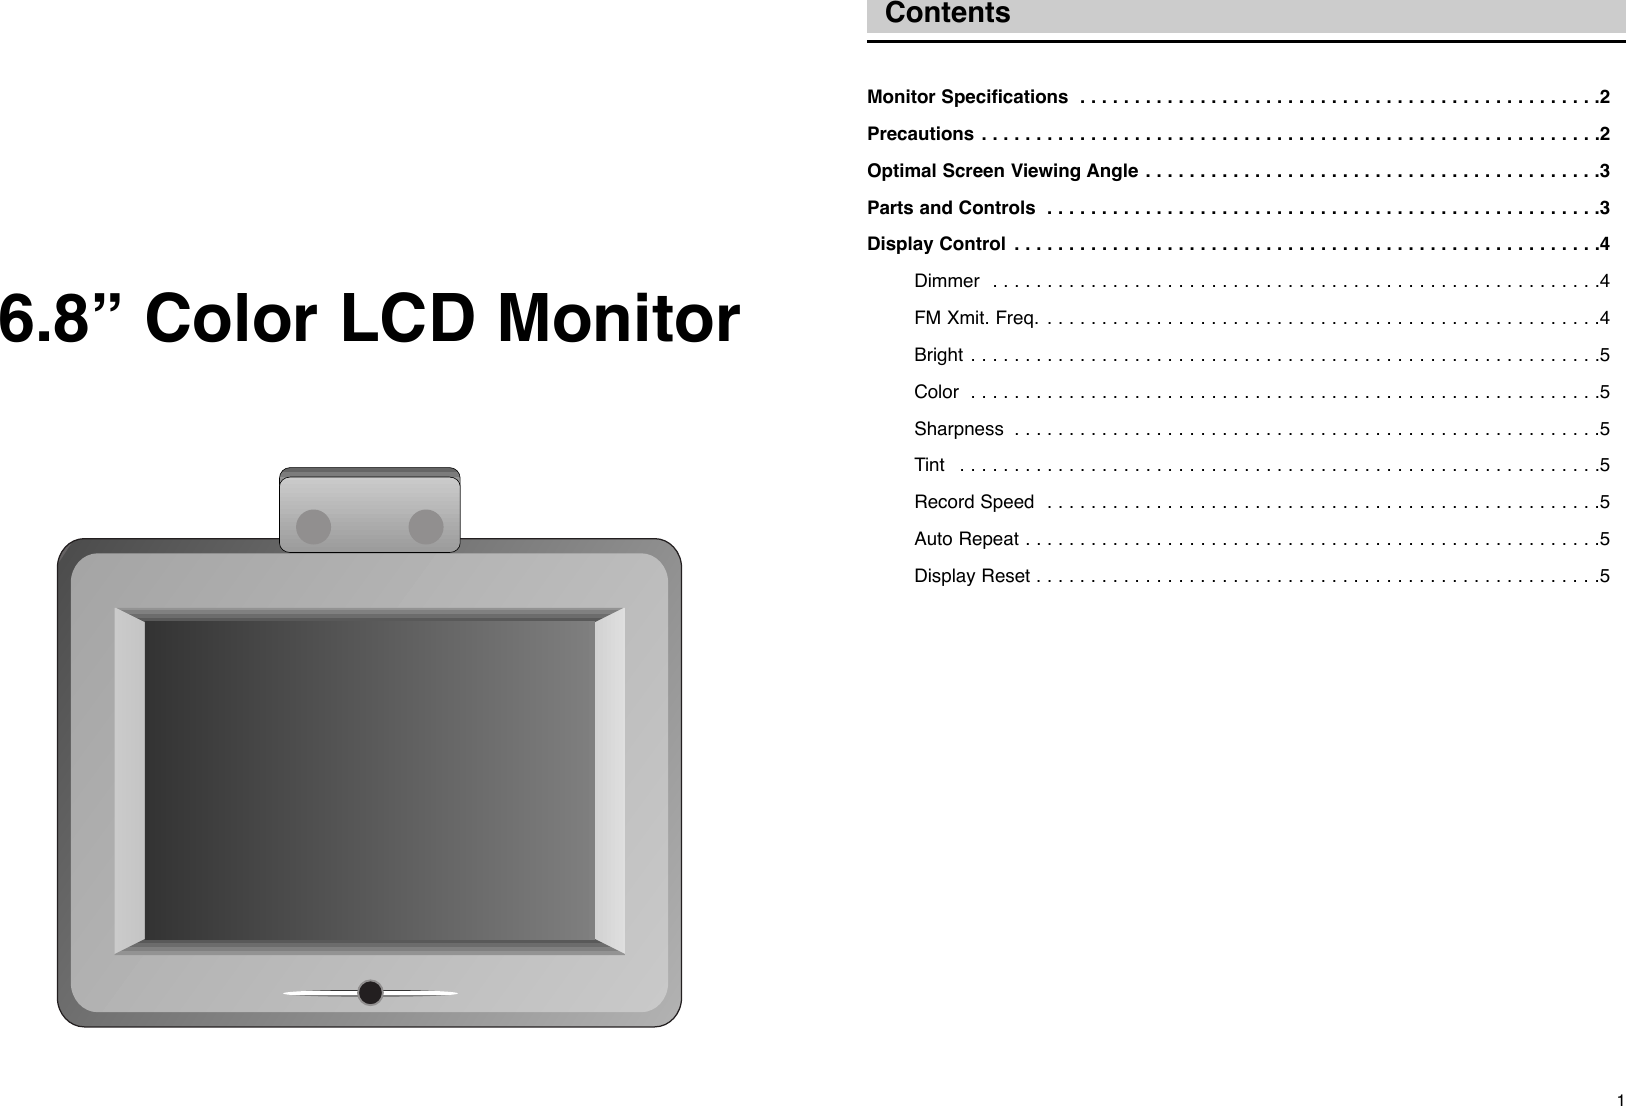 Contents16.8Ó Color LCD MonitorMonitor Specifications  . . . . . . . . . . . . . . . . . . . . . . . . . . . . . . . . . . . . . . . . . . . . . . . .2Precautions . . . . . . . . . . . . . . . . . . . . . . . . . . . . . . . . . . . . . . . . . . . . . . . . . . . . . . . . .2Optimal Screen Viewing Angle . . . . . . . . . . . . . . . . . . . . . . . . . . . . . . . . . . . . . . . . . .3Parts and Controls  . . . . . . . . . . . . . . . . . . . . . . . . . . . . . . . . . . . . . . . . . . . . . . . . . . .3Display Control  . . . . . . . . . . . . . . . . . . . . . . . . . . . . . . . . . . . . . . . . . . . . . . . . . . . . . .4Dimmer  . . . . . . . . . . . . . . . . . . . . . . . . . . . . . . . . . . . . . . . . . . . . . . . . . . . . . . . .4FM Xmit. Freq. . . . . . . . . . . . . . . . . . . . . . . . . . . . . . . . . . . . . . . . . . . . . . . . . . . .4Bright . . . . . . . . . . . . . . . . . . . . . . . . . . . . . . . . . . . . . . . . . . . . . . . . . . . . . . . . . .5Color  . . . . . . . . . . . . . . . . . . . . . . . . . . . . . . . . . . . . . . . . . . . . . . . . . . . . . . . . . .5Sharpness  . . . . . . . . . . . . . . . . . . . . . . . . . . . . . . . . . . . . . . . . . . . . . . . . . . . . . .5Tint  . . . . . . . . . . . . . . . . . . . . . . . . . . . . . . . . . . . . . . . . . . . . . . . . . . . . . . . . . . .5Record Speed  . . . . . . . . . . . . . . . . . . . . . . . . . . . . . . . . . . . . . . . . . . . . . . . . . . .5Auto Repeat . . . . . . . . . . . . . . . . . . . . . . . . . . . . . . . . . . . . . . . . . . . . . . . . . . . . .5Display Reset . . . . . . . . . . . . . . . . . . . . . . . . . . . . . . . . . . . . . . . . . . . . . . . . . . . .5